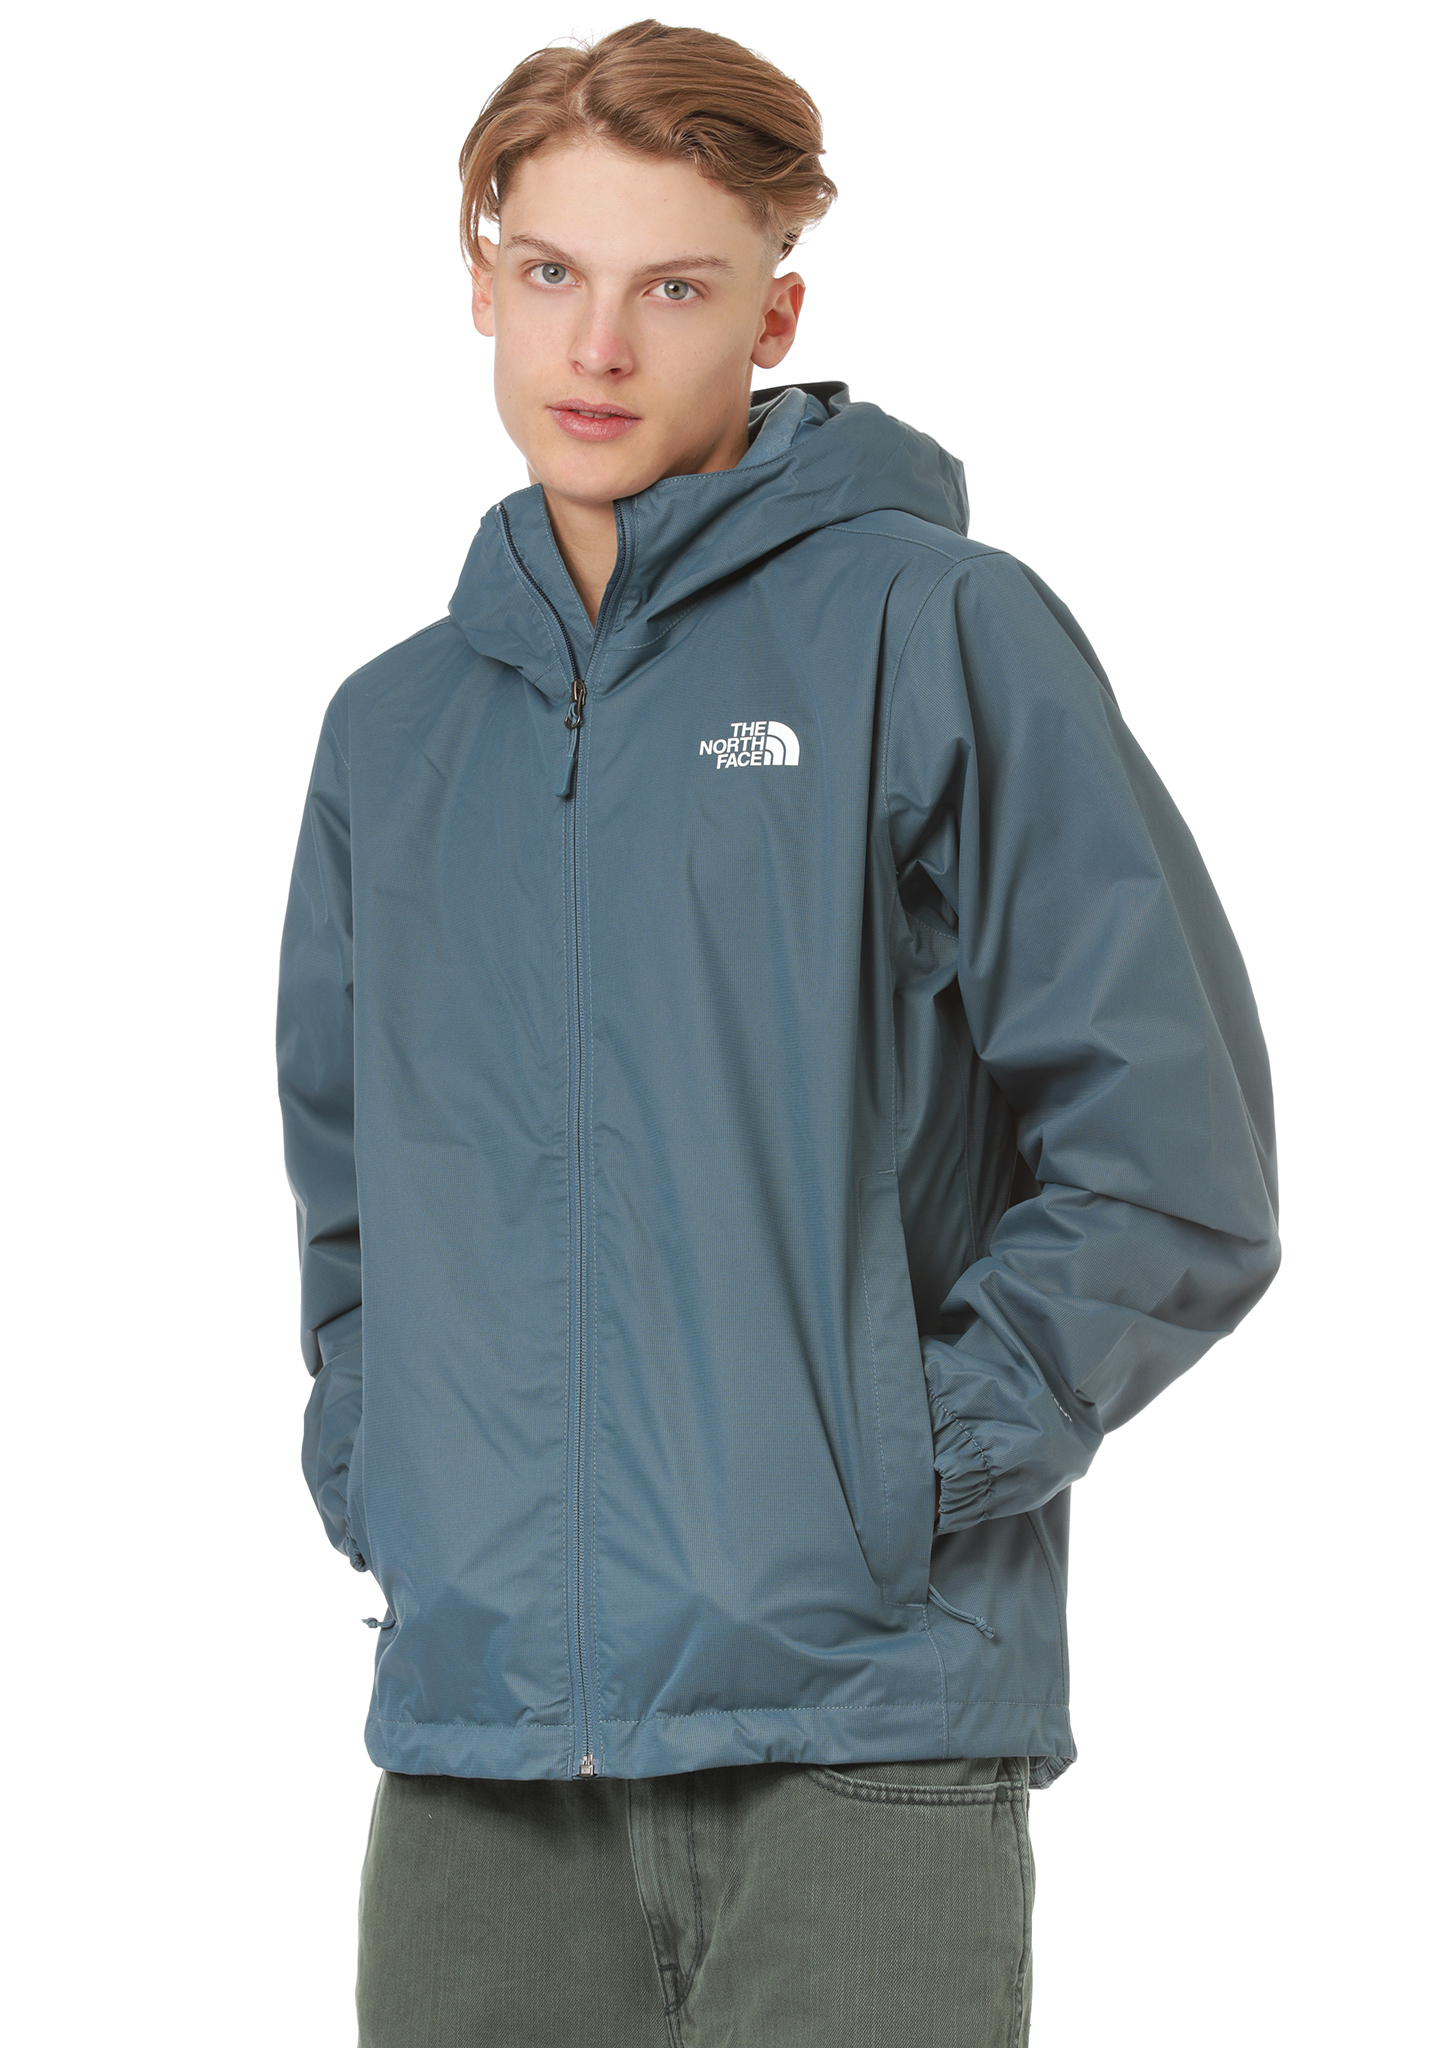 The North Face Quest Jacke blue XL